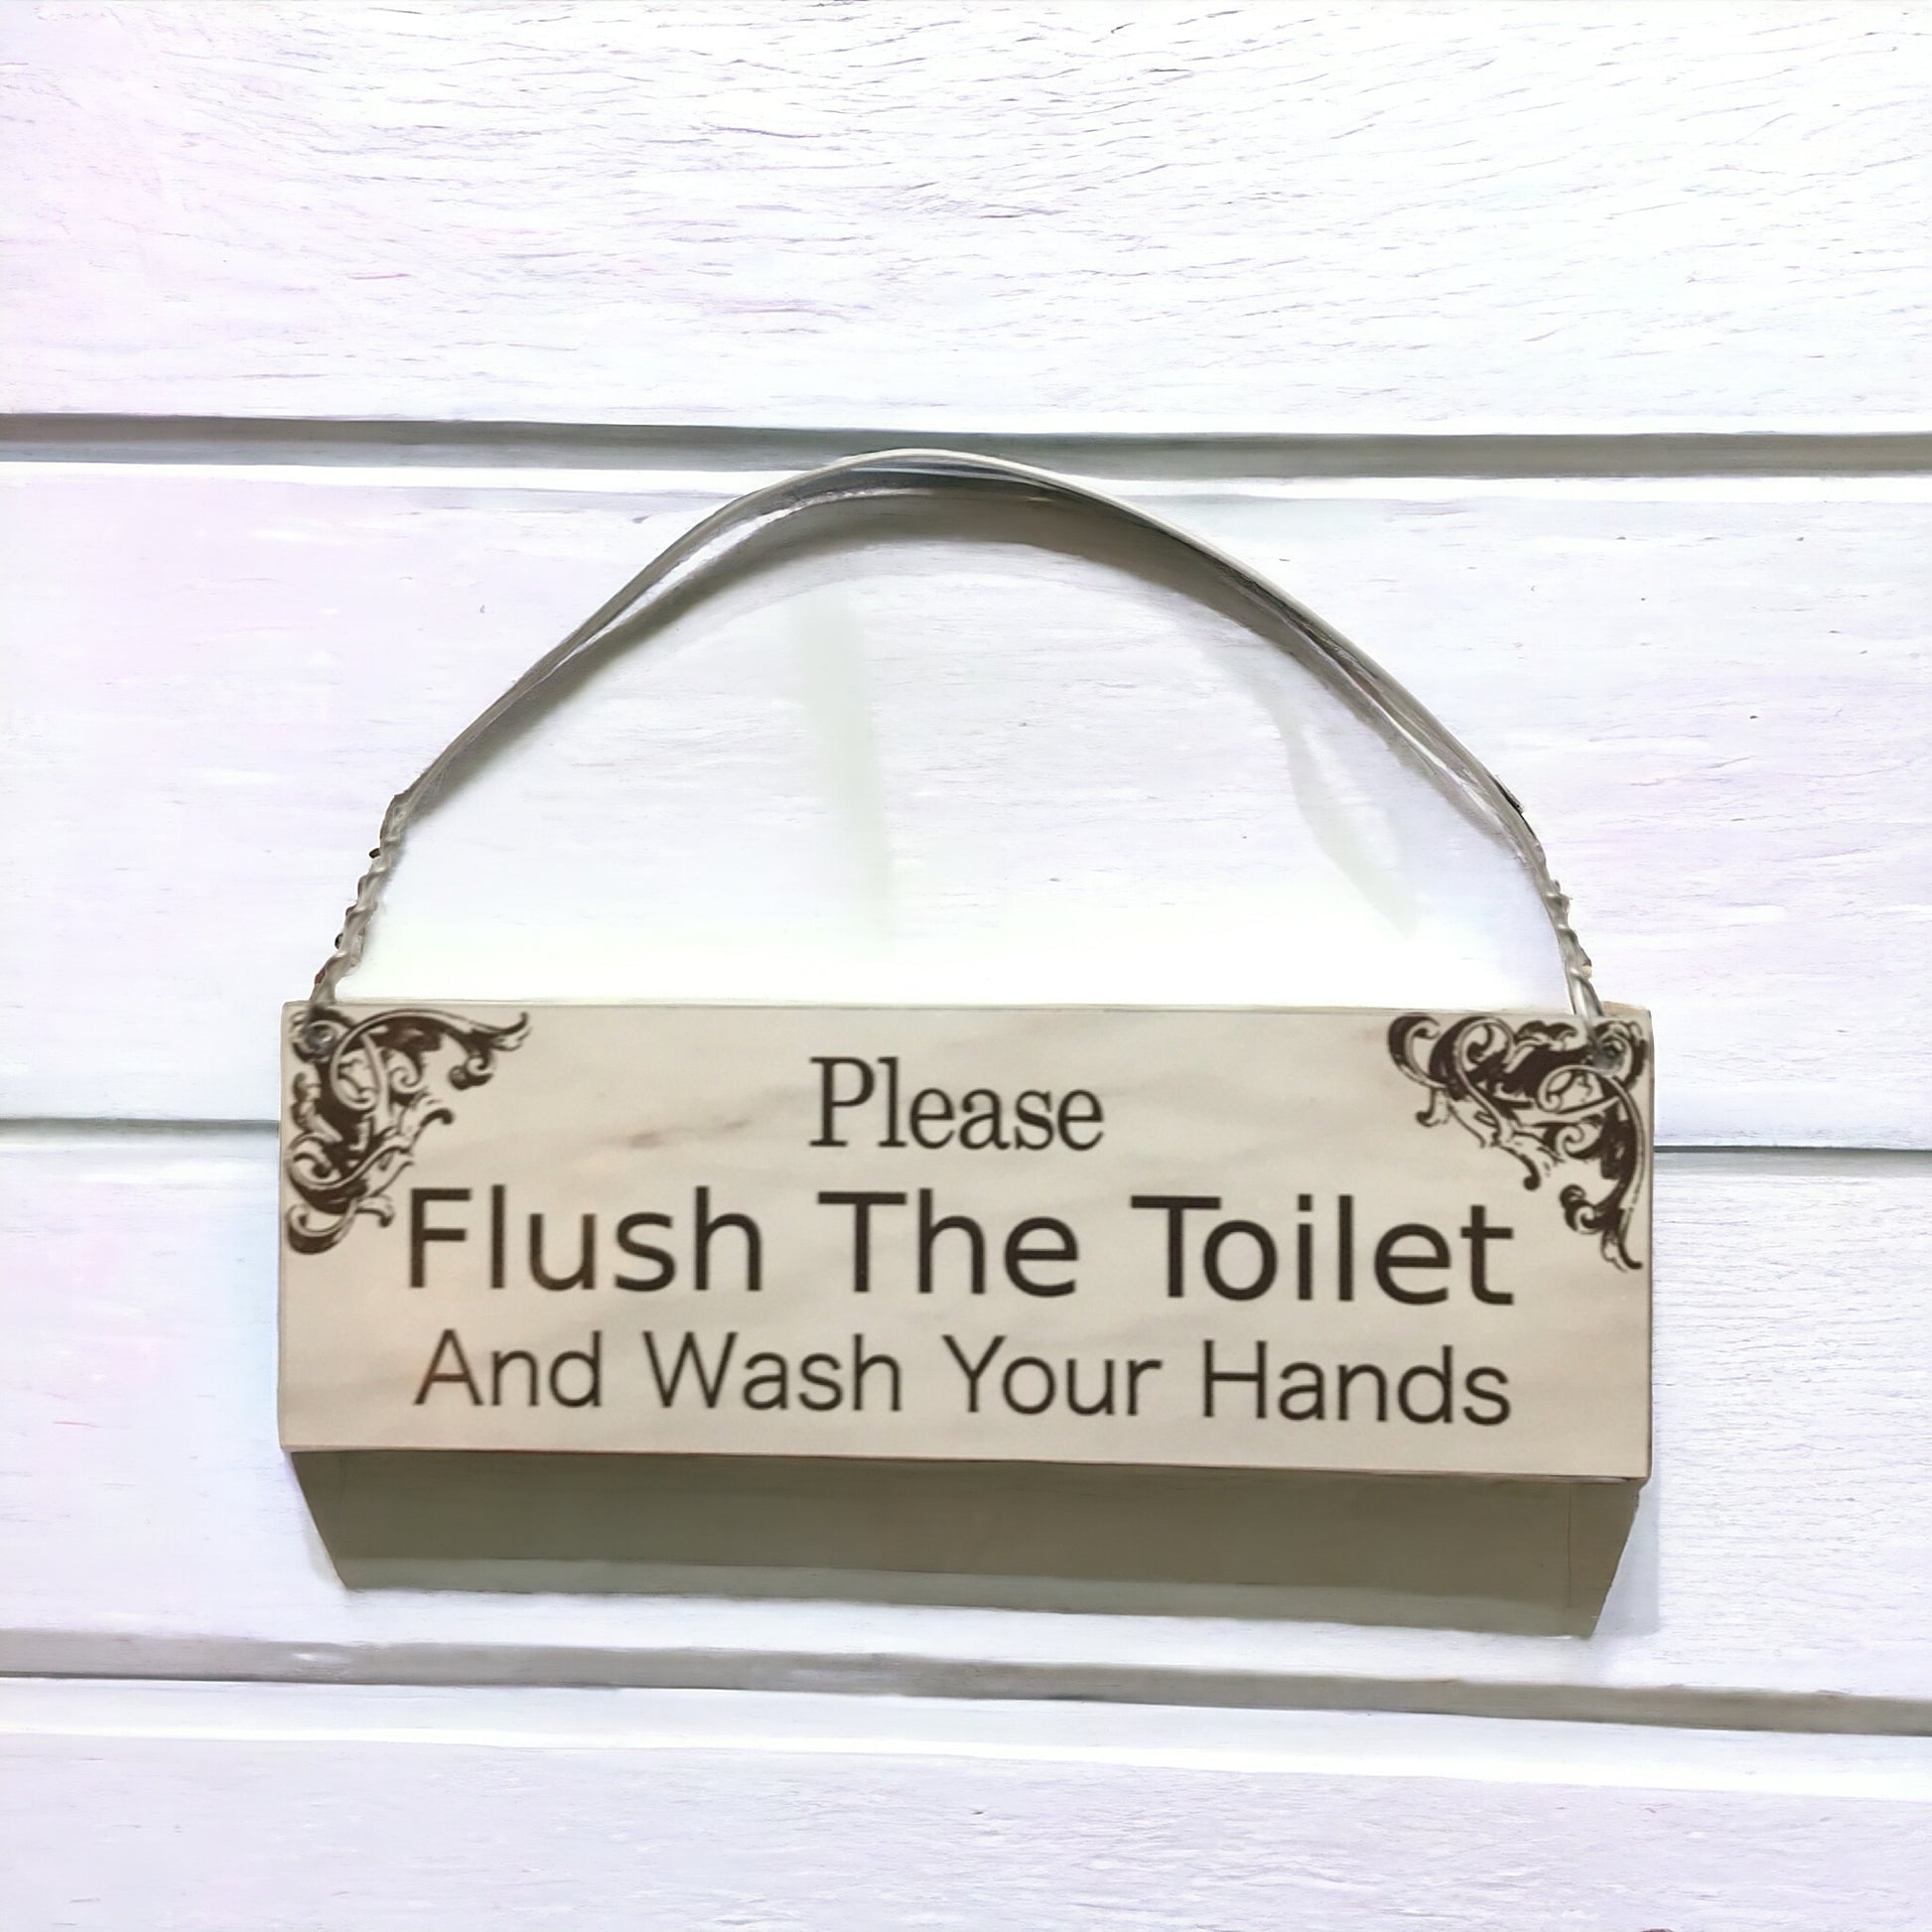 Flush Toilet Wash Your Hands Sign - The Renmy Store Homewares & Gifts 